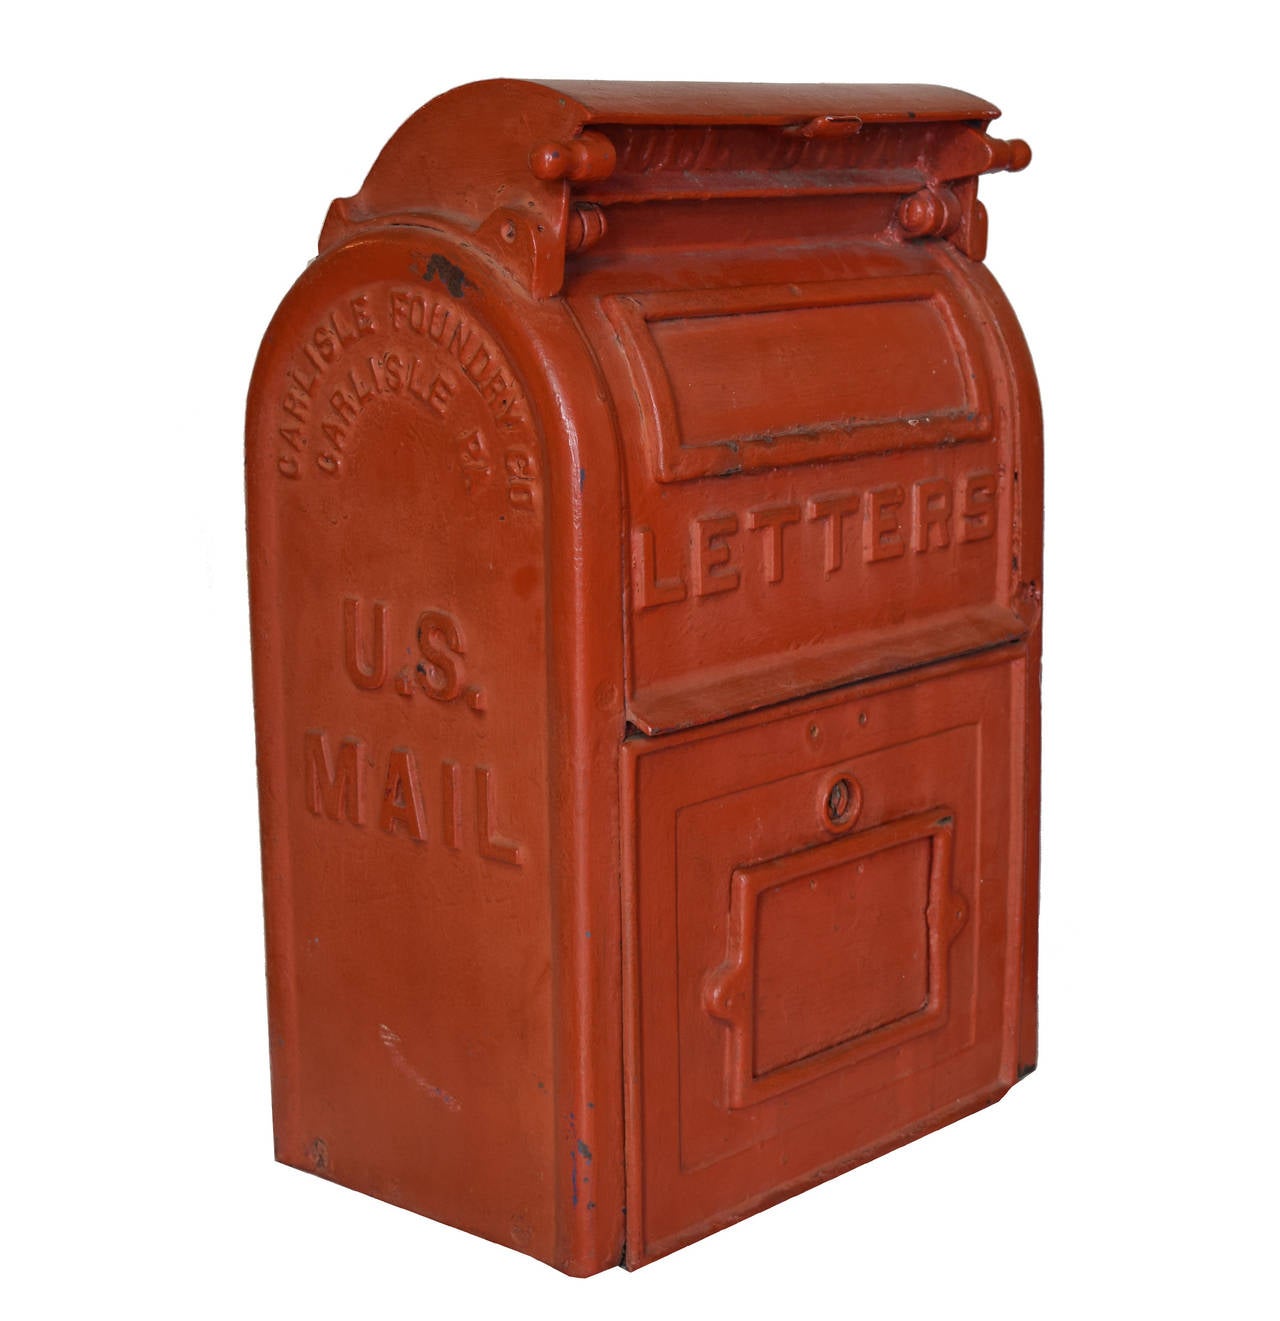 A cast iron U.S mailbox manufactured by the Carlisle Foundry Co. in Carlisle, PA. Painted red, circa 1930s.